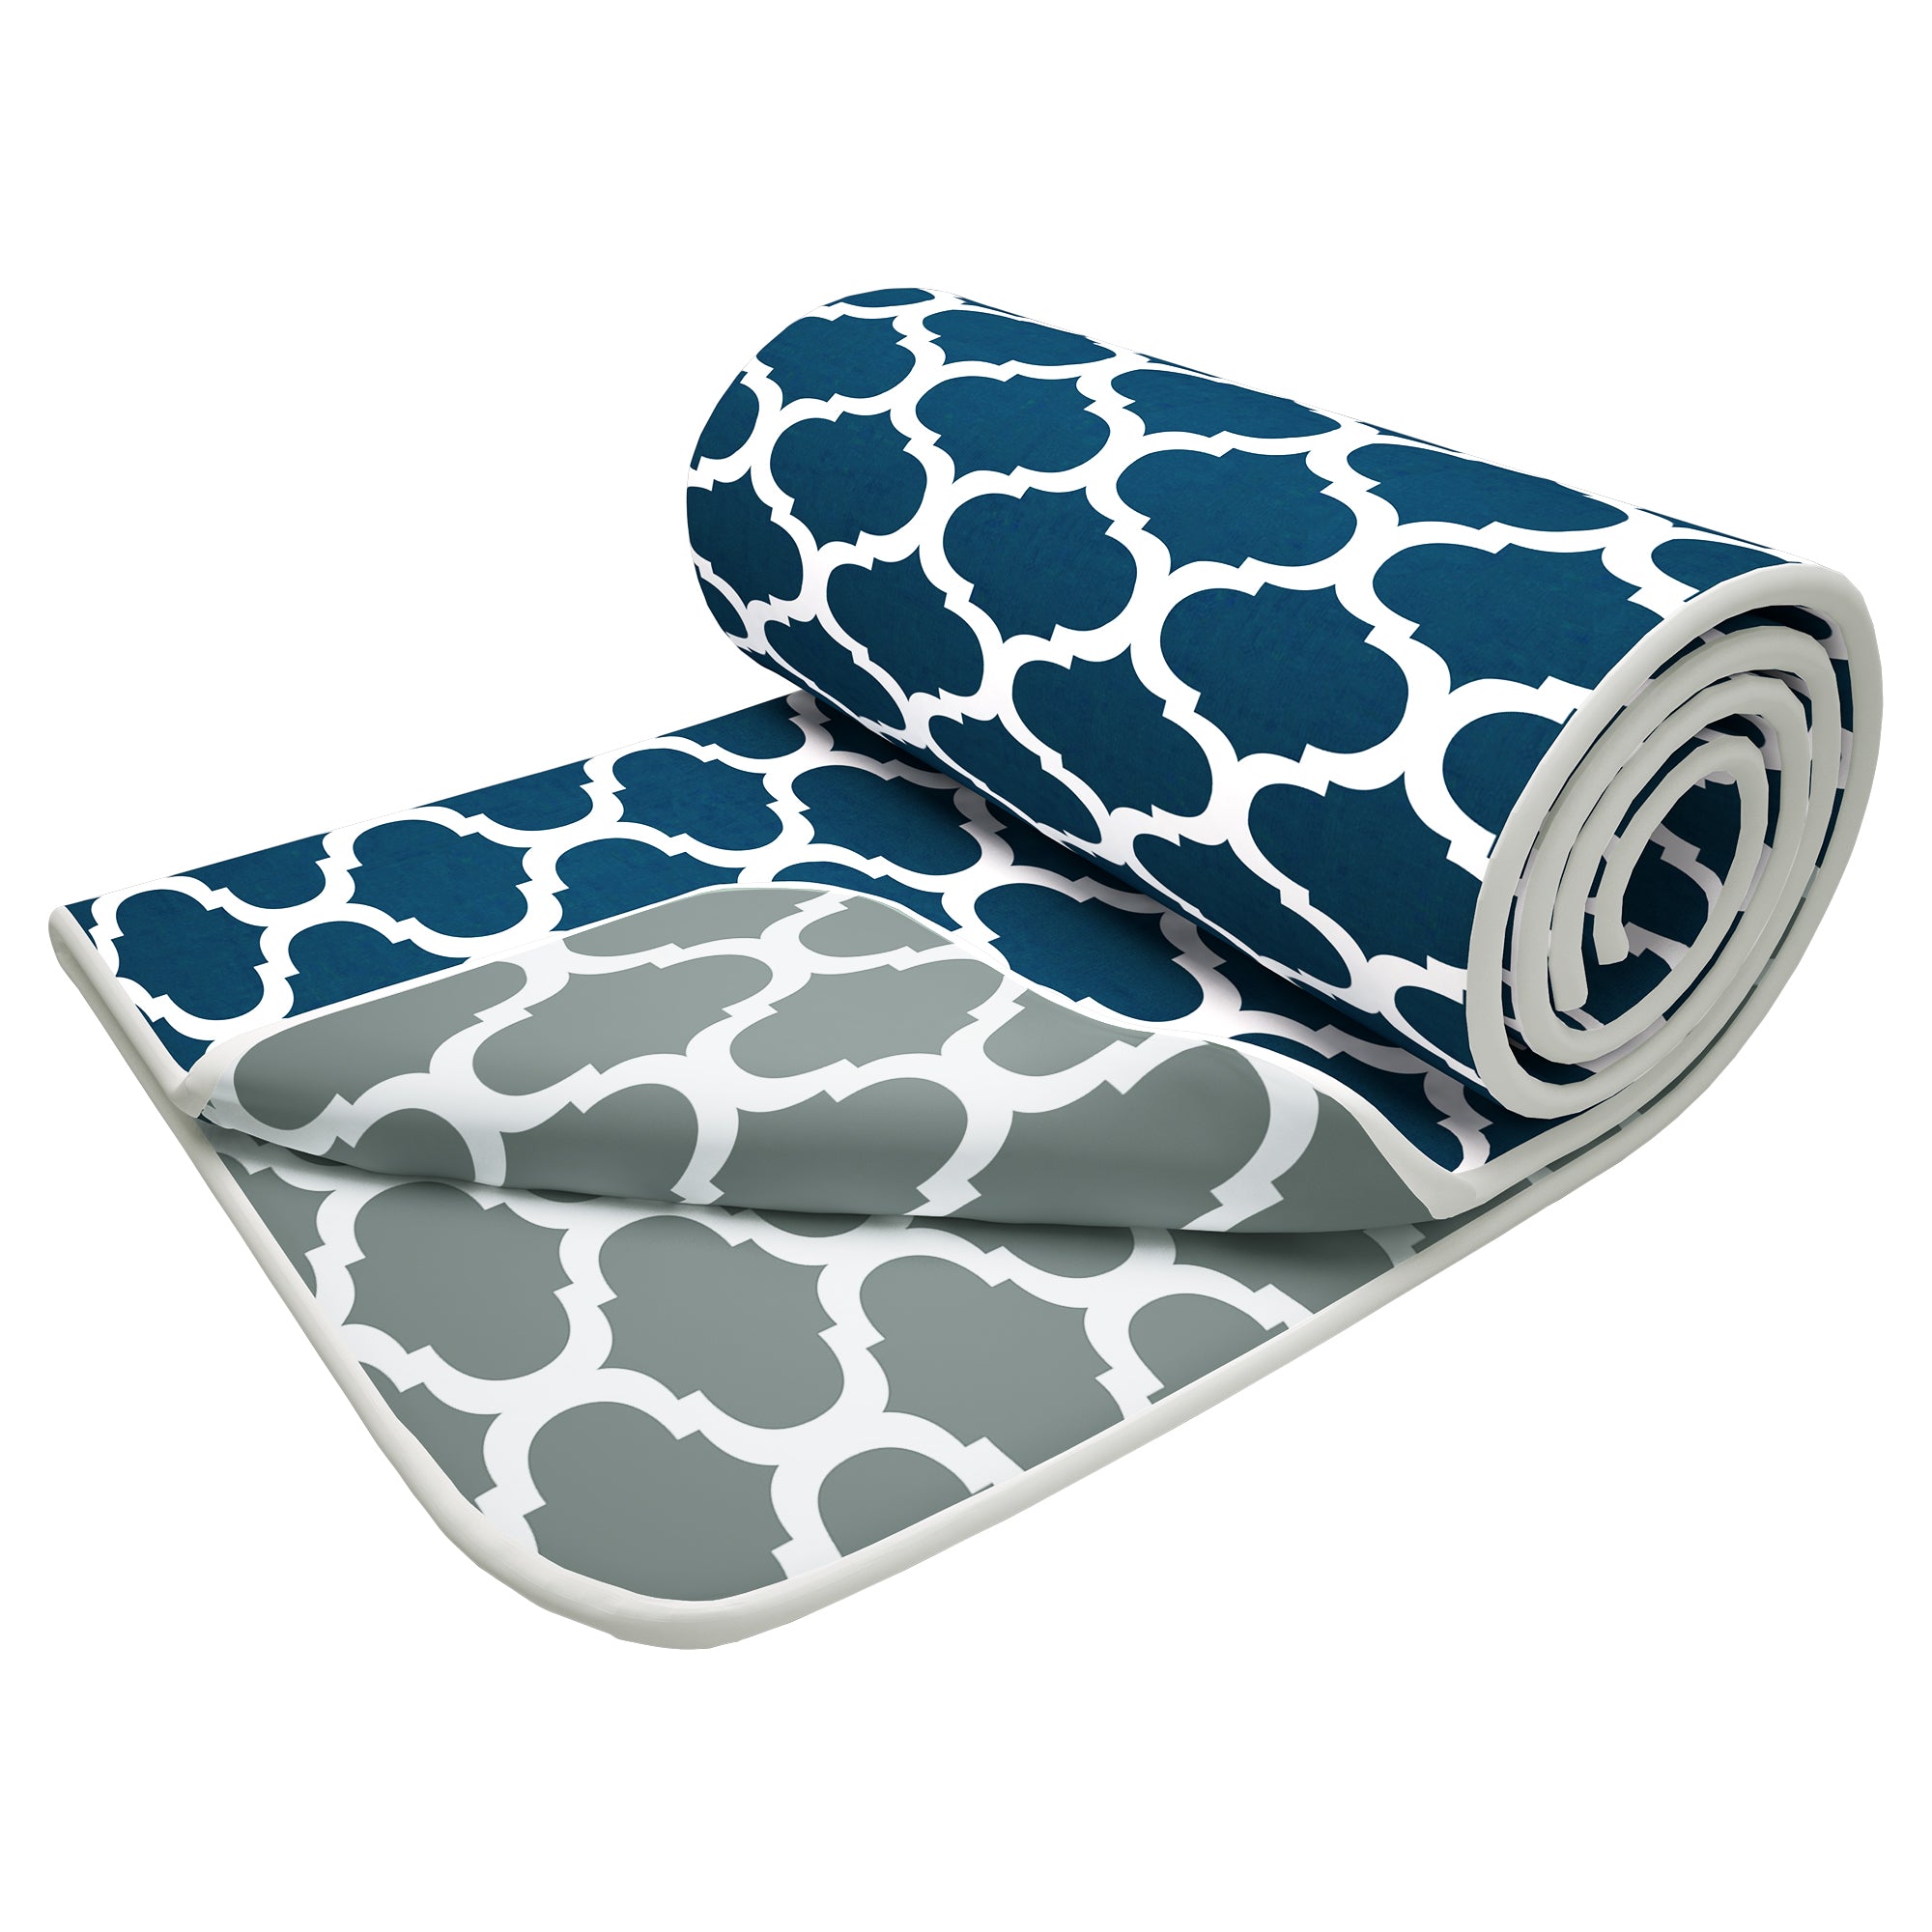 Super Soft Blue and Grey Abstract Reversible Single Size Dohar - Pack of 2